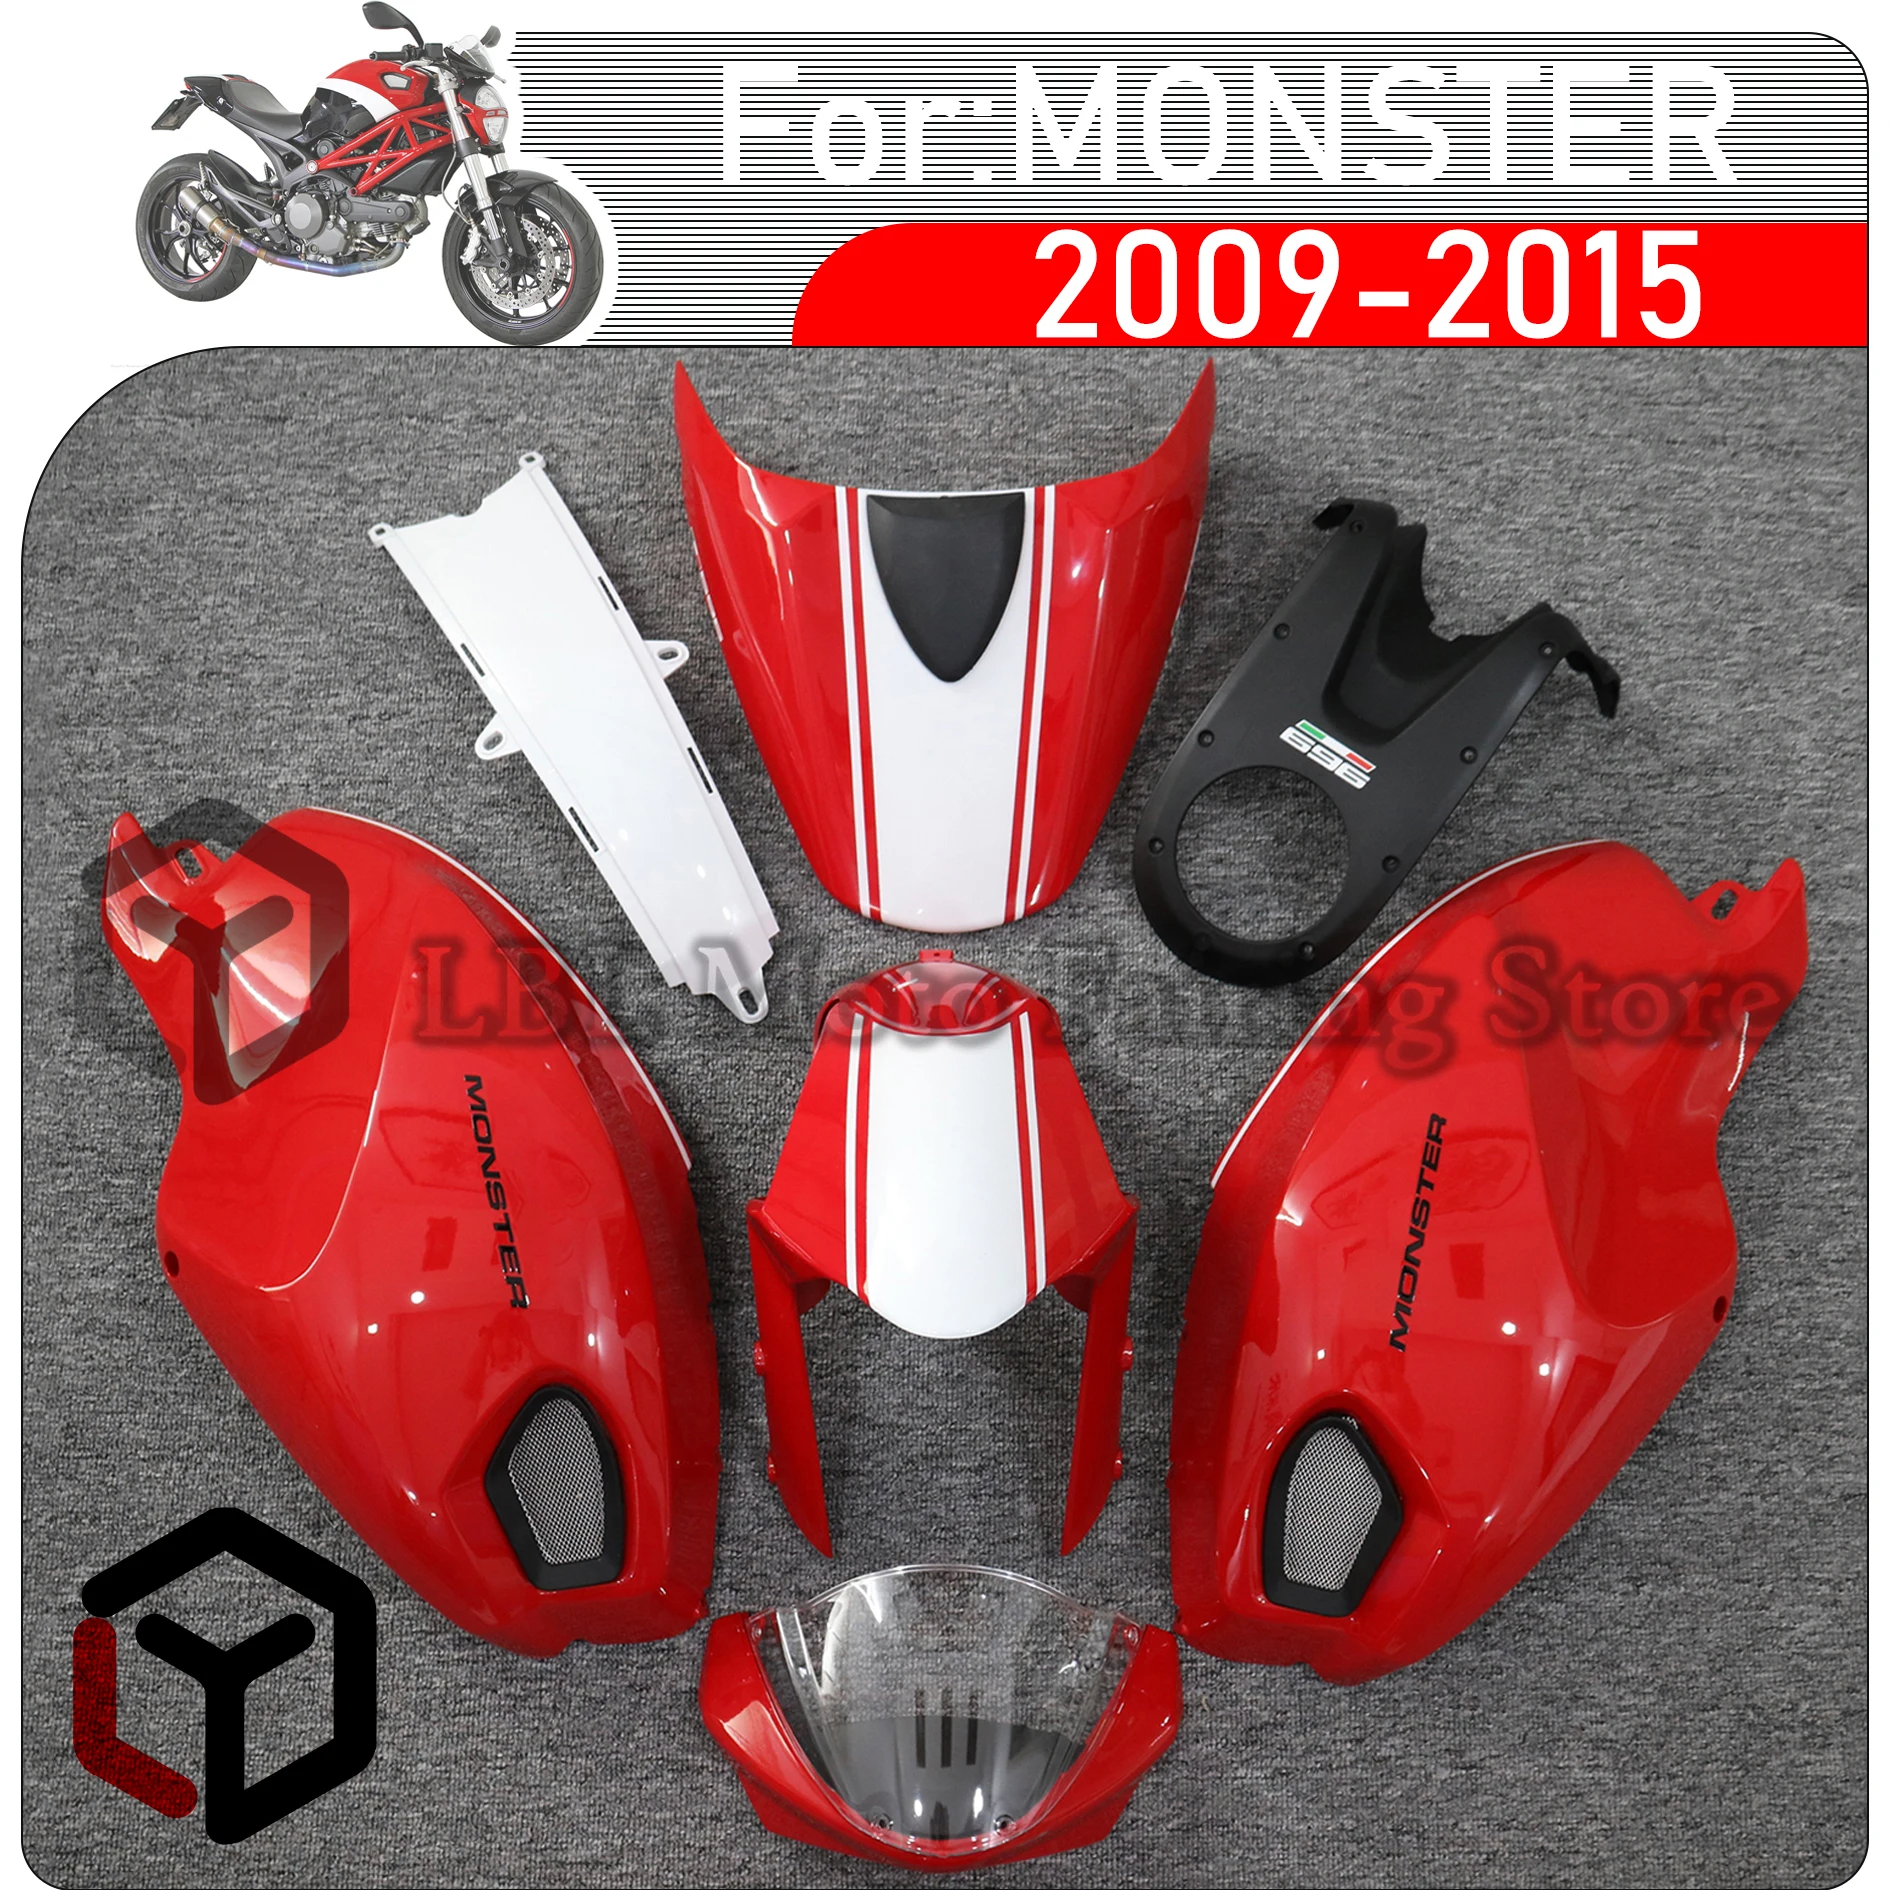 

Motorcycle Full Body Fit Fairing Accessory For Ducati Monster 696 795 796 M 1100 1100S EVO 2009 2010 2011 2012 2013 2014 2015